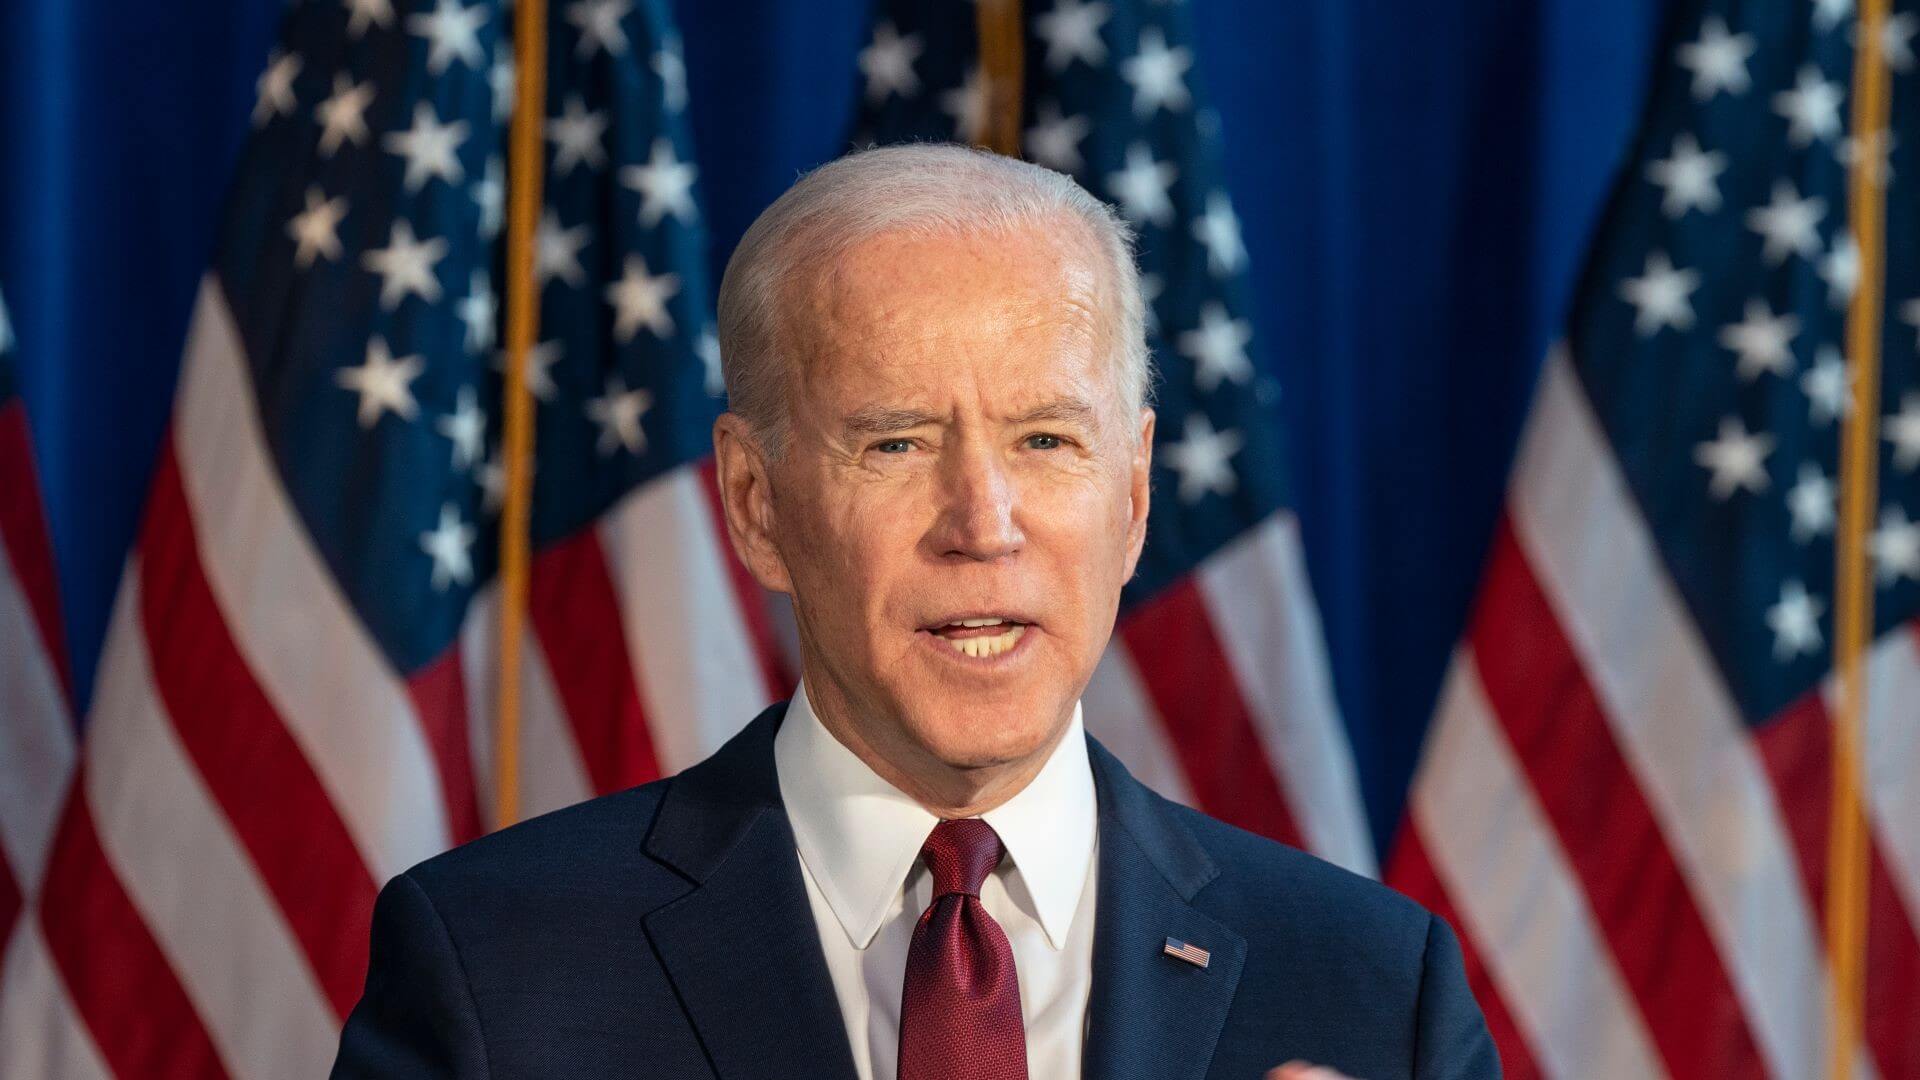 Head and shoulders image of US President Joe Biden standing at lecturn with US flags set behind him